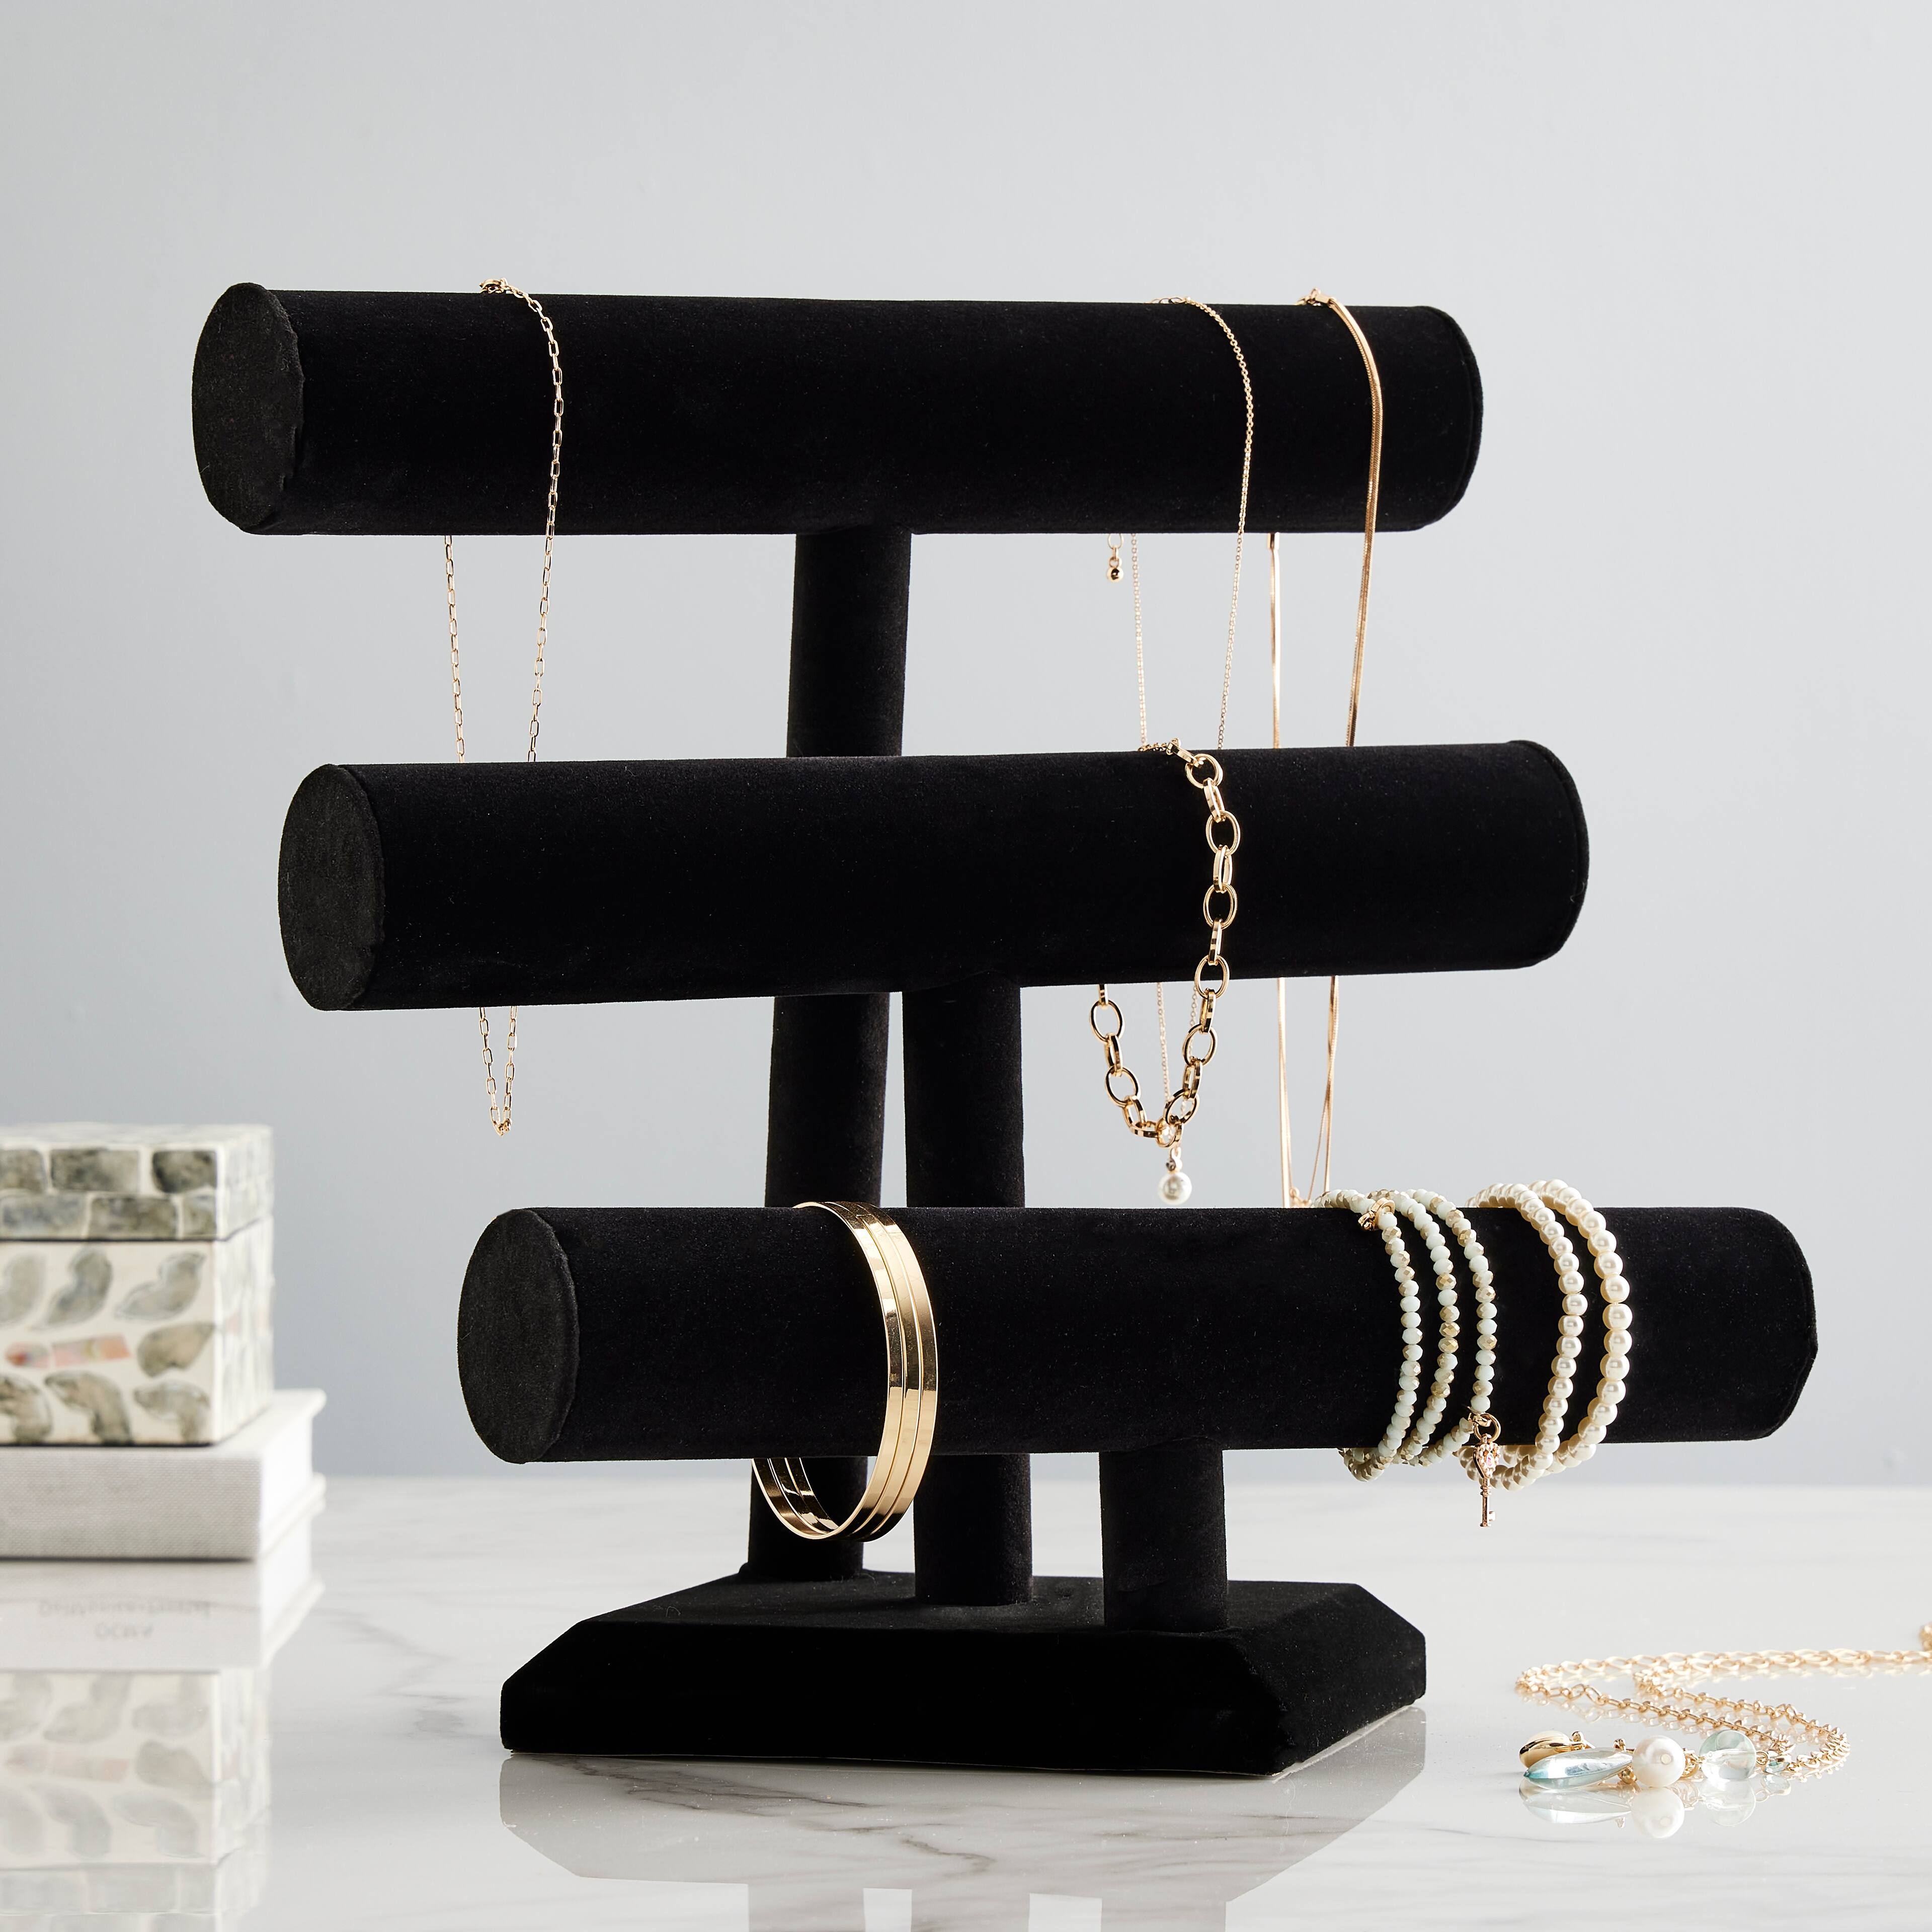 3 Tier Black Velvet Jewelry Display Holder for Selling Bracelets, Organizer  Rack Stand for Necklaces, Accessories 12x9x7 in 